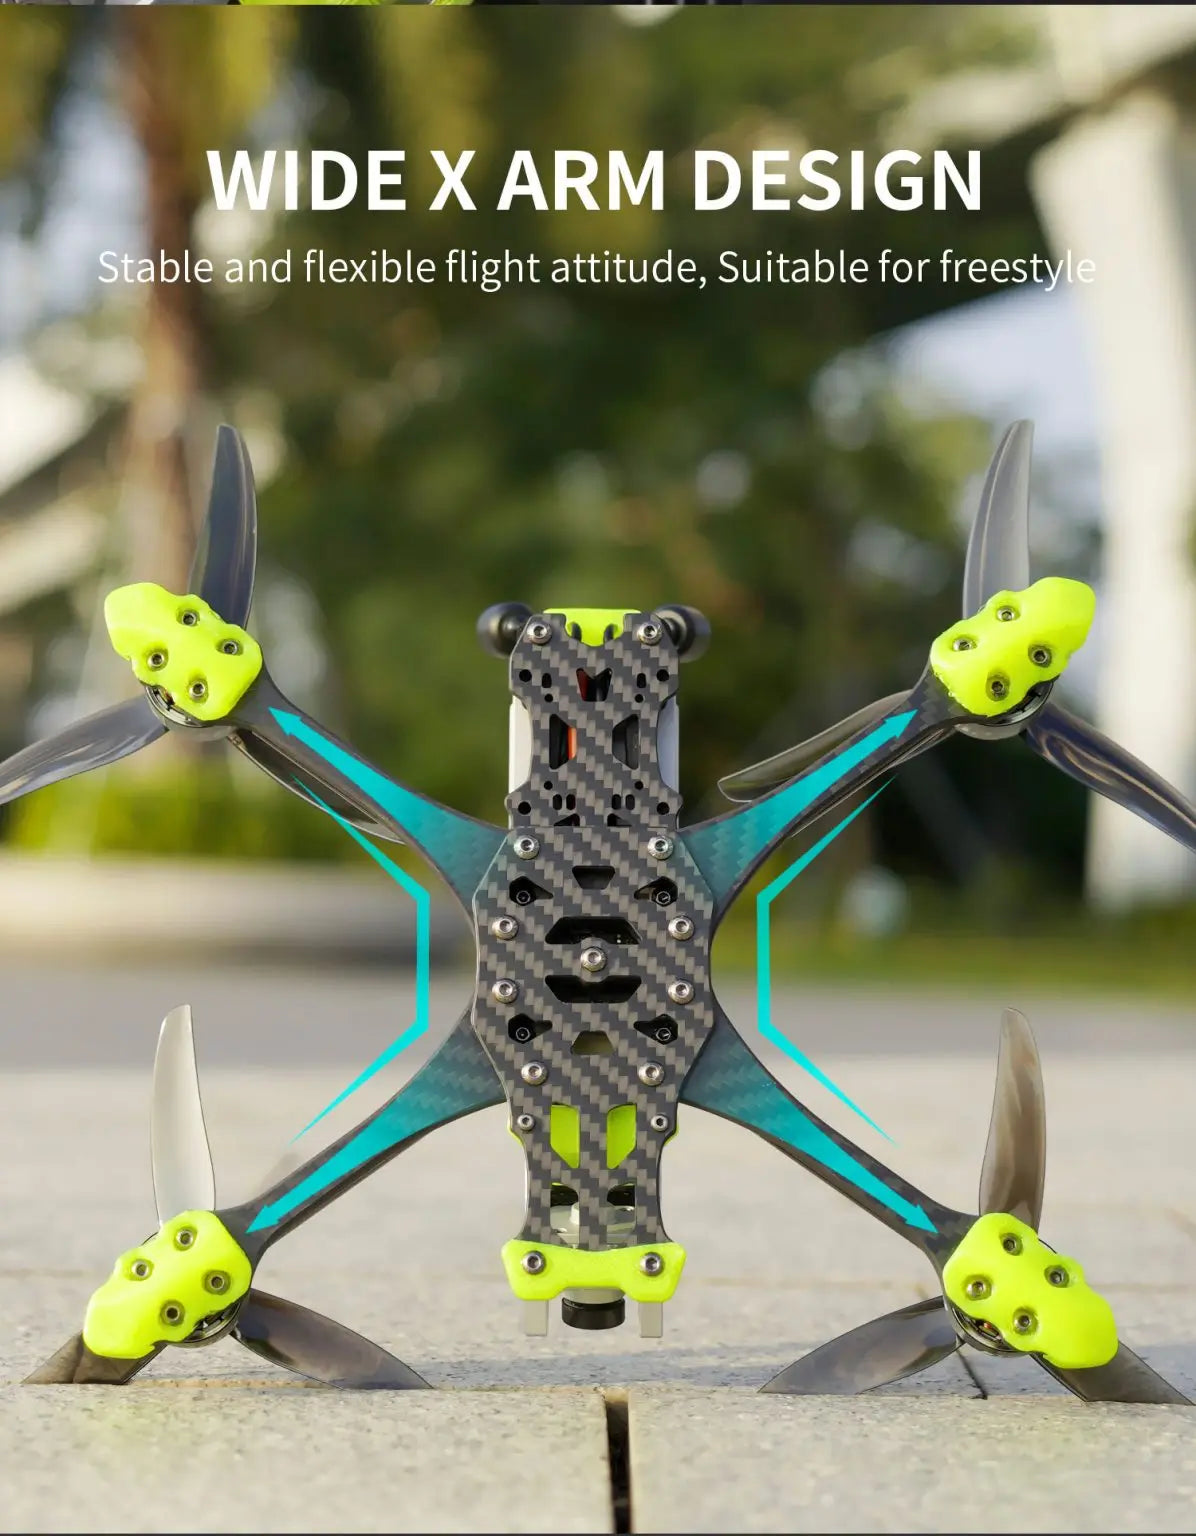 GEPRC MARK5 FPV Drone, WIDE XARM DESIGN Stable and flexible flight attitude; Suitable for free